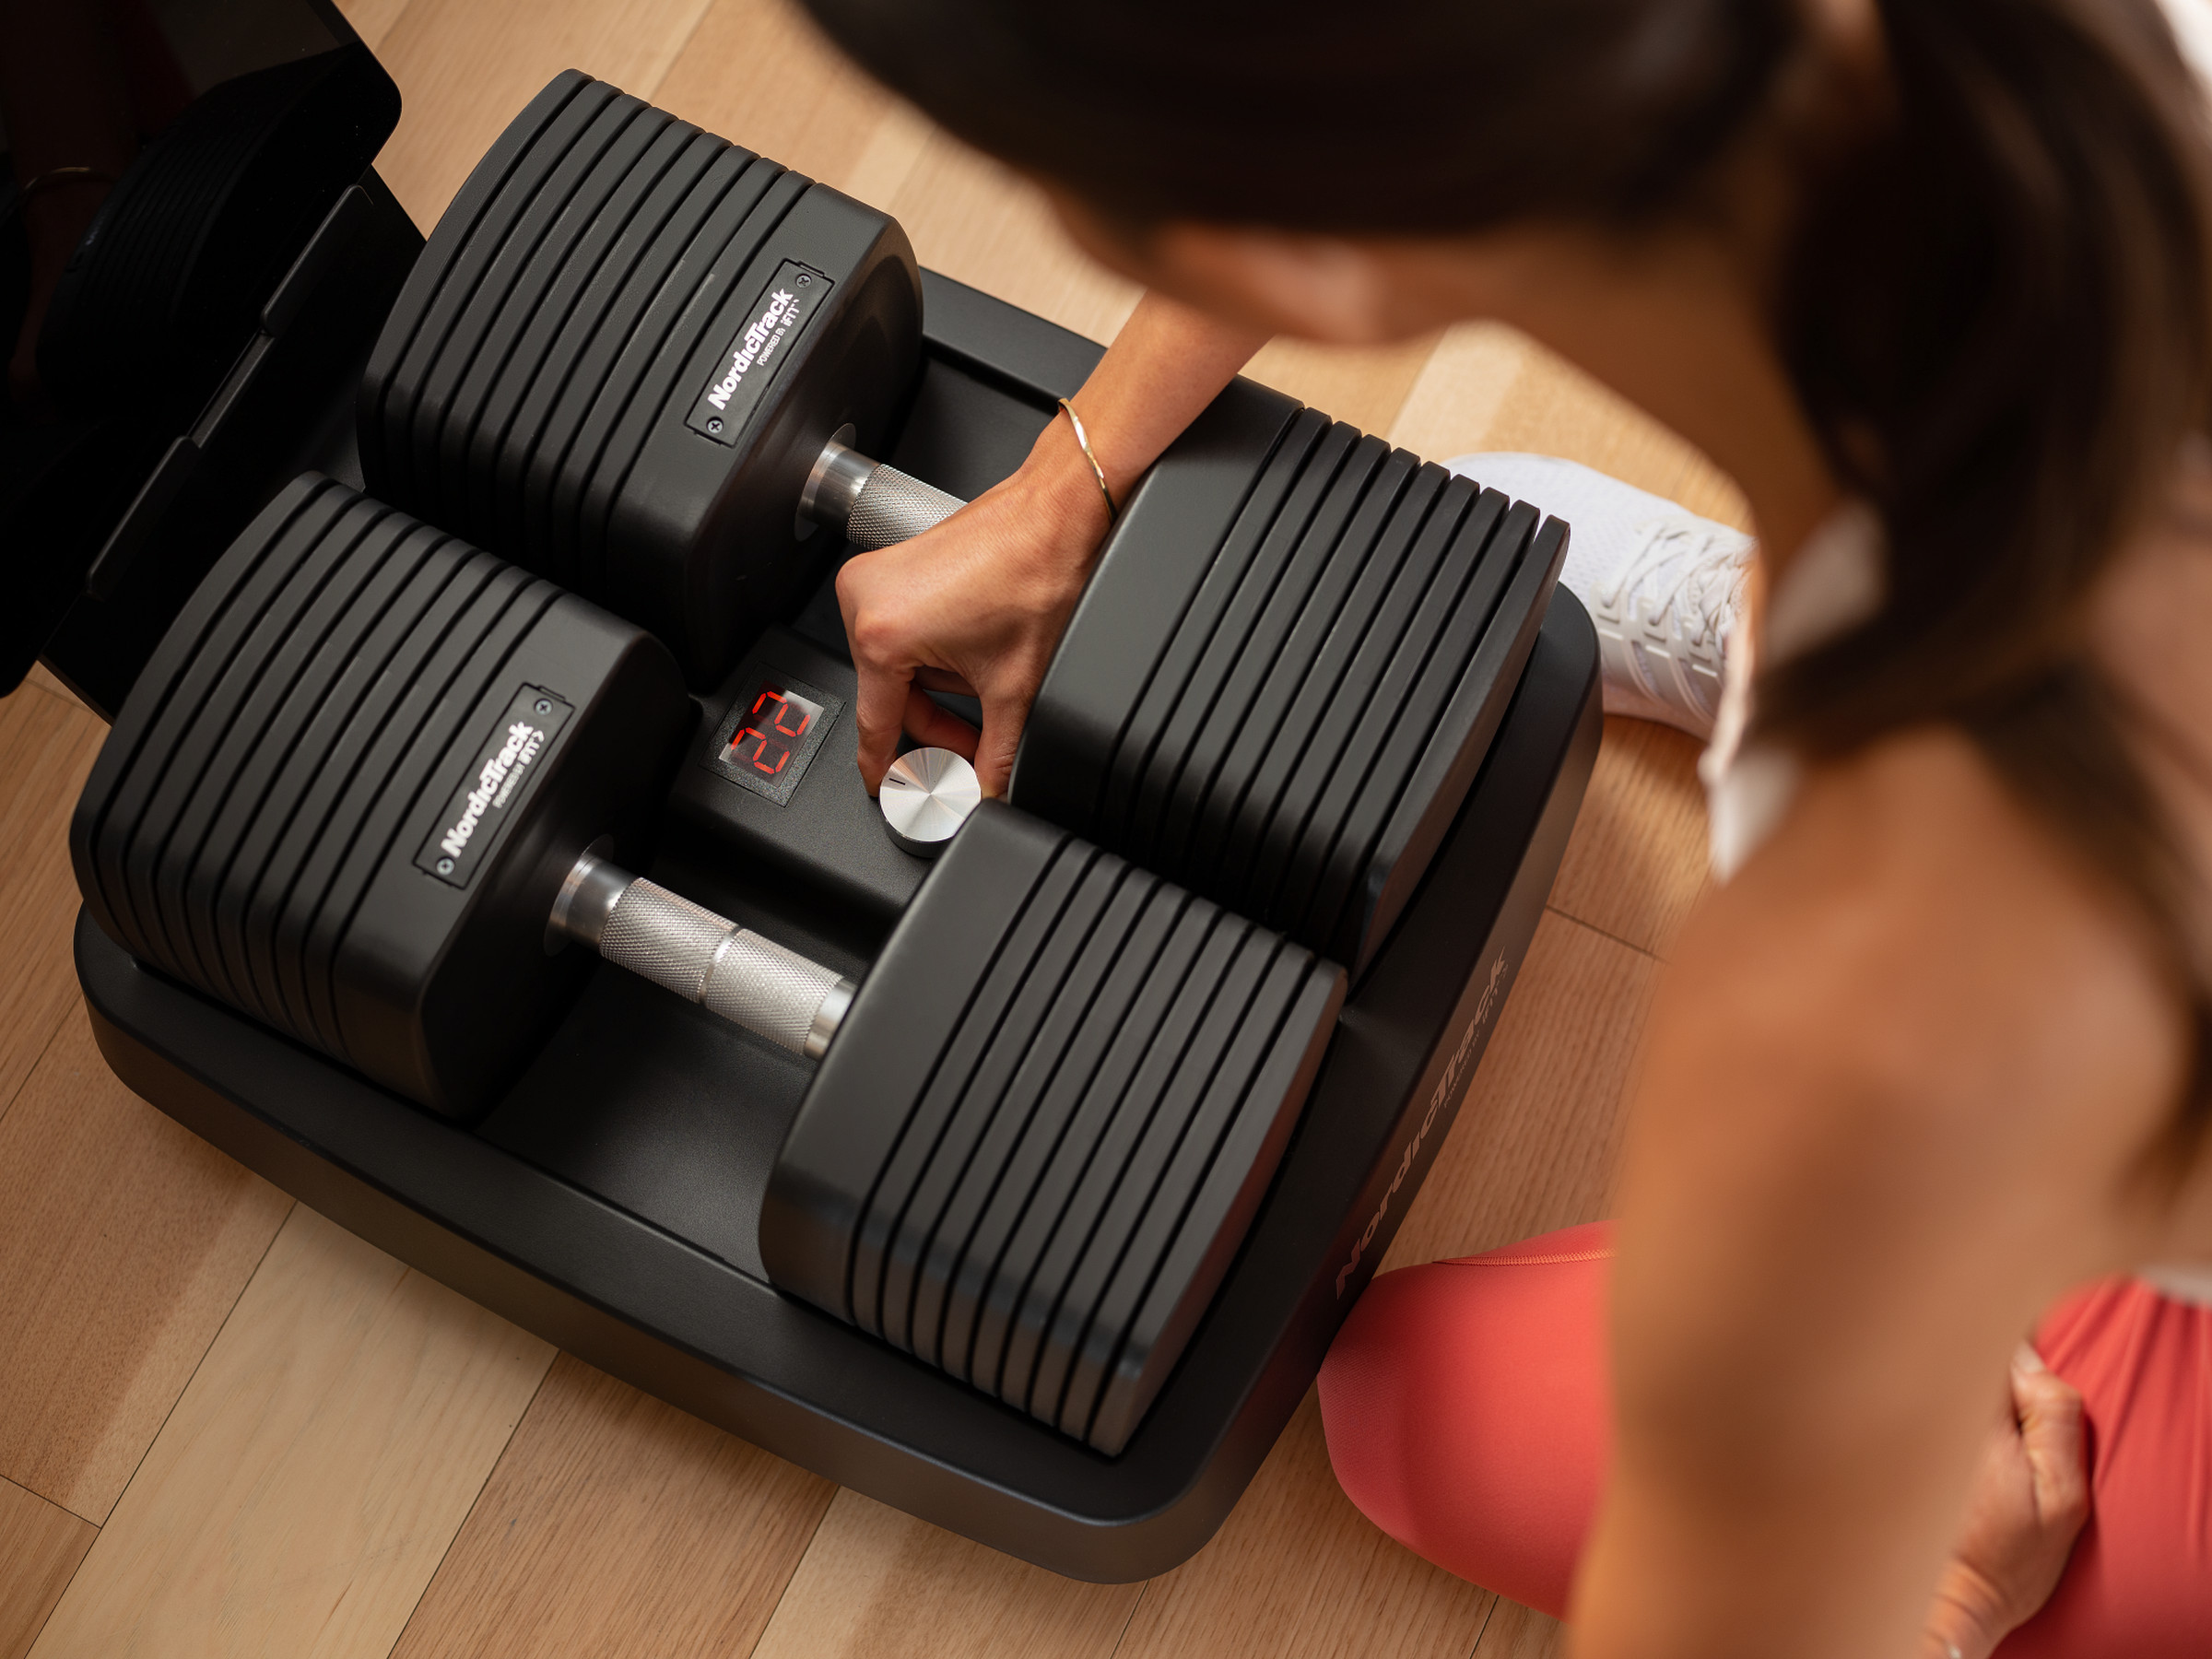 Woman turns knob embedded into the rack to adjust dumbbell weight